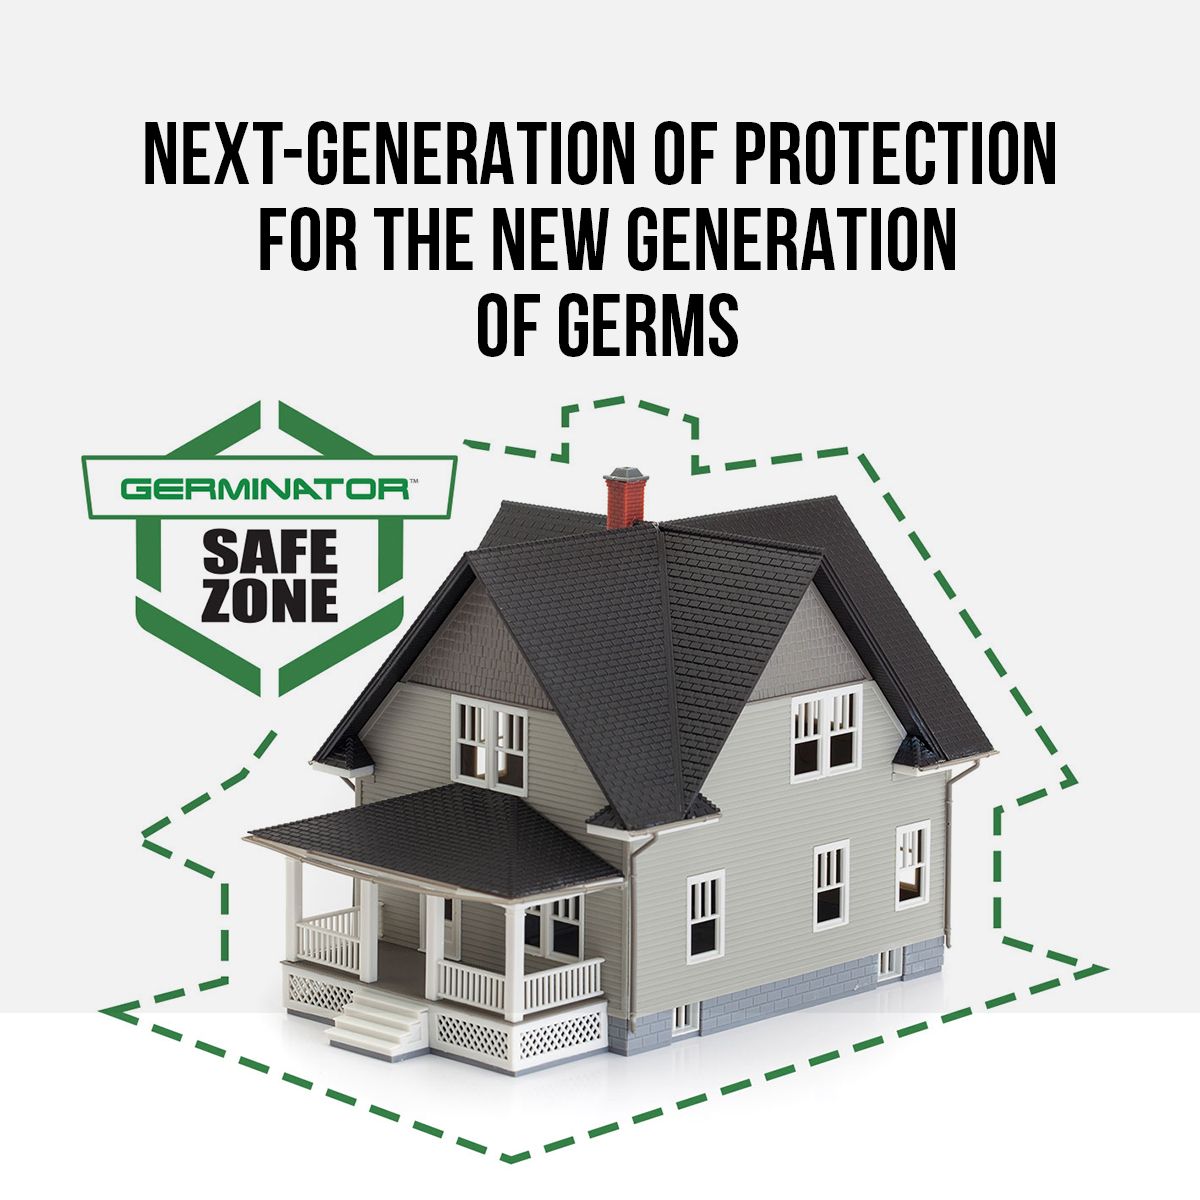 Next-Generation of Protection for the New Generation of Germs